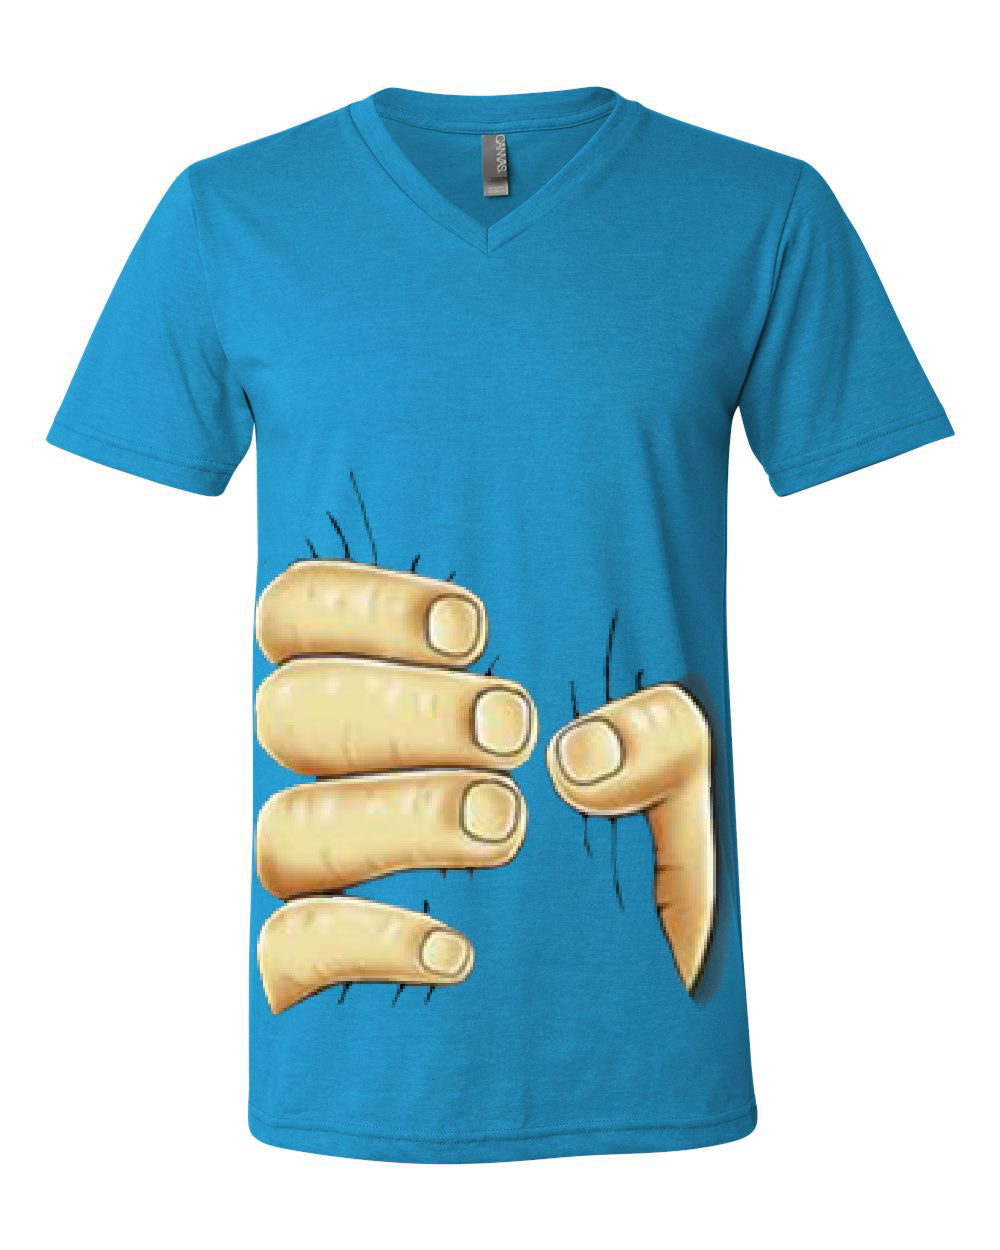 Giant Hand Squeezing V-Neck T-Shirt Funny Male Hand Grabbing Tee | eBay